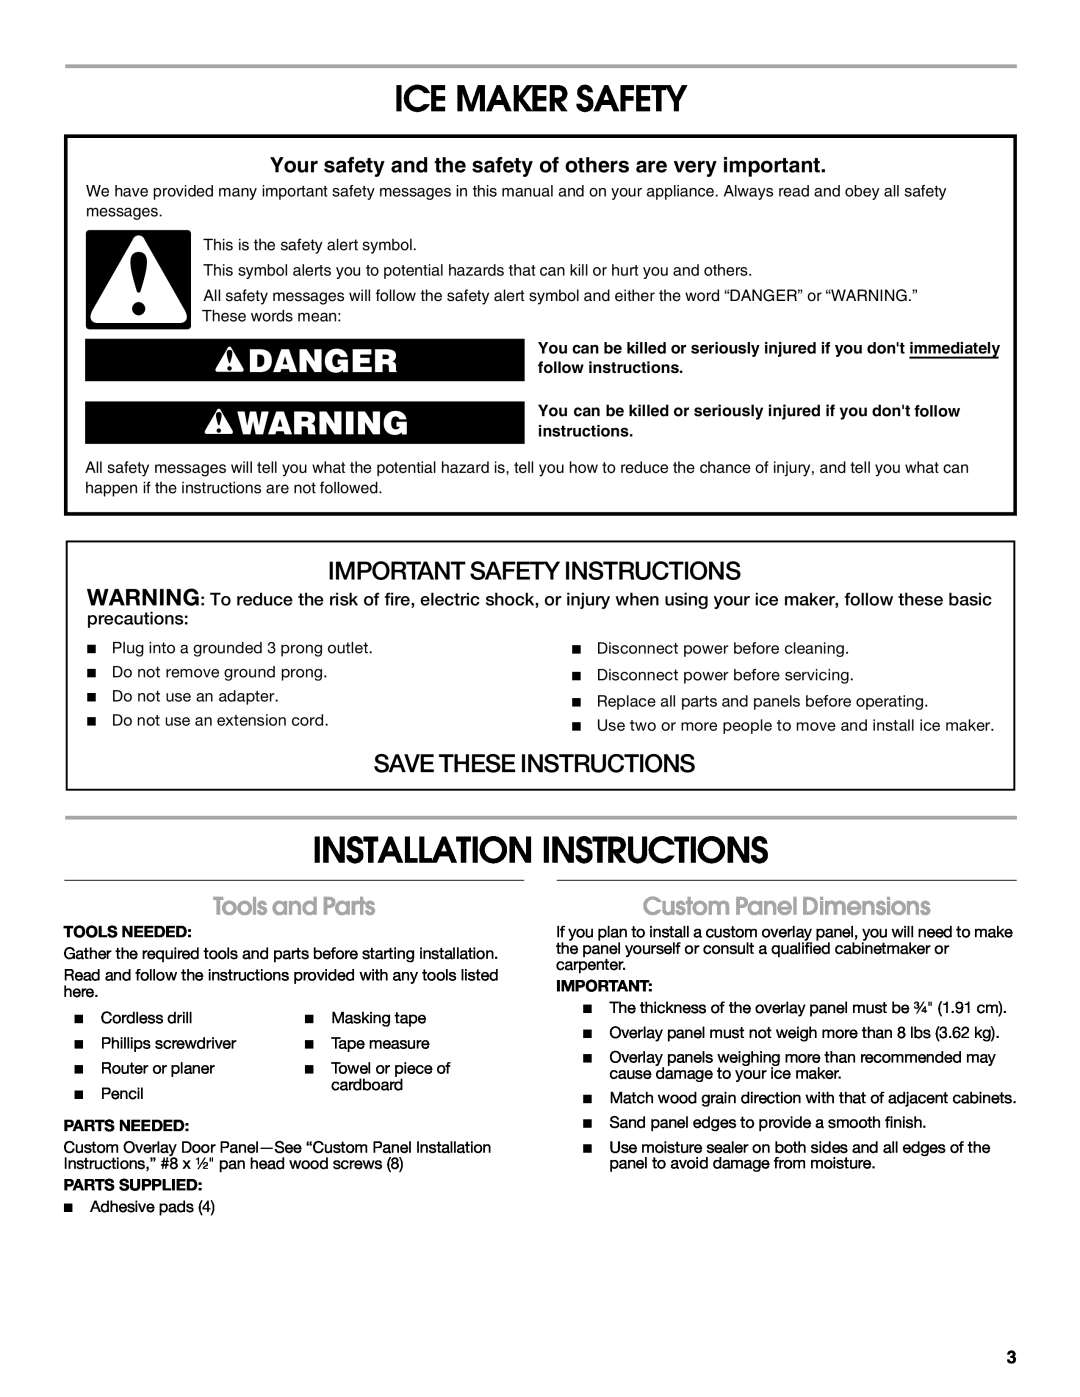 Jenn-Air W10282143B Ice Maker Safety, Installation Instructions, Danger, Important Safety Instructions, Tools and Parts 